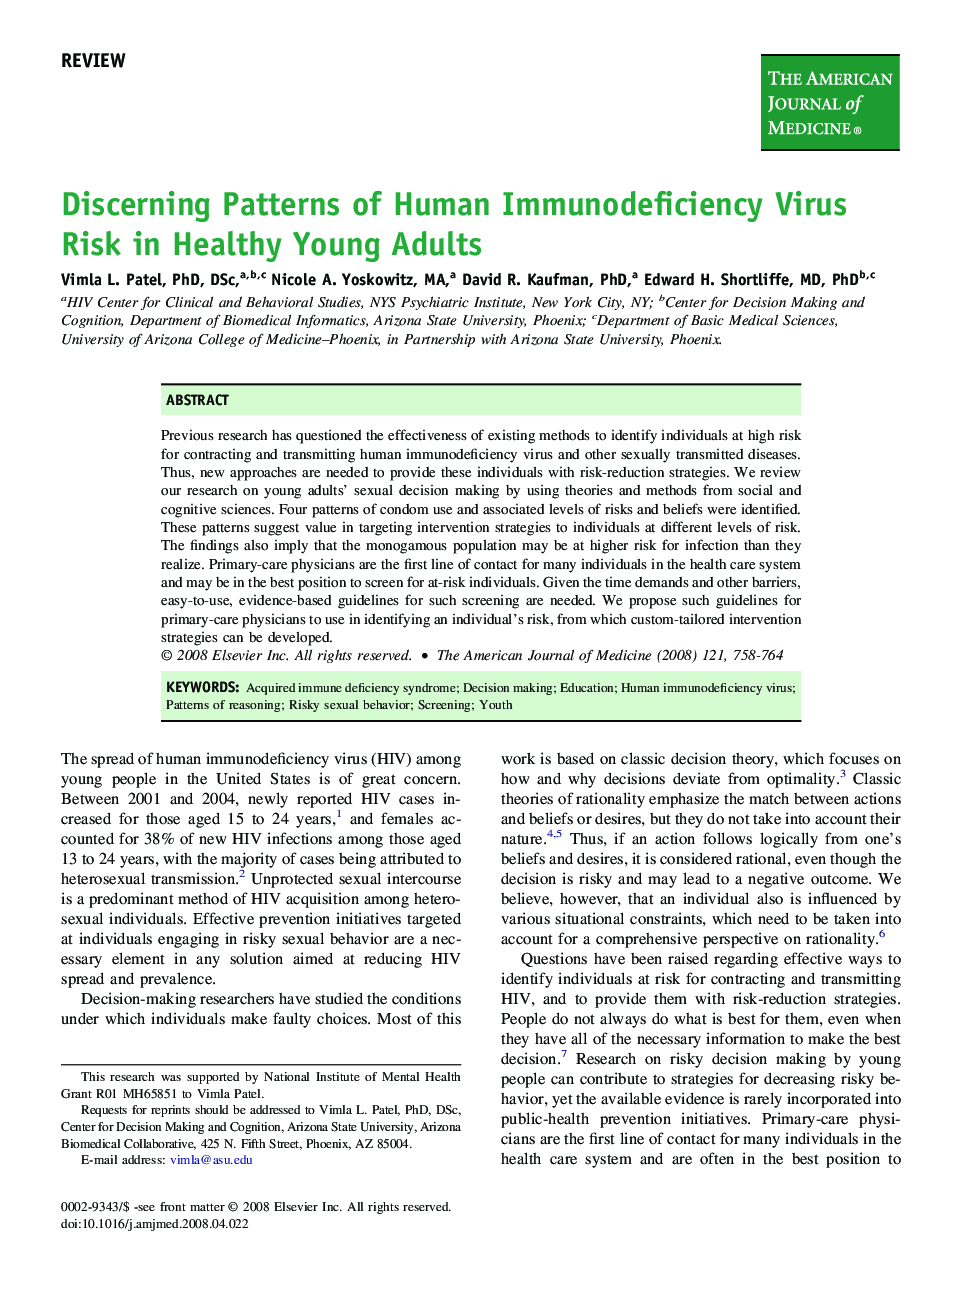 Discerning Patterns of Human Immunodeficiency Virus Risk in Healthy Young Adults